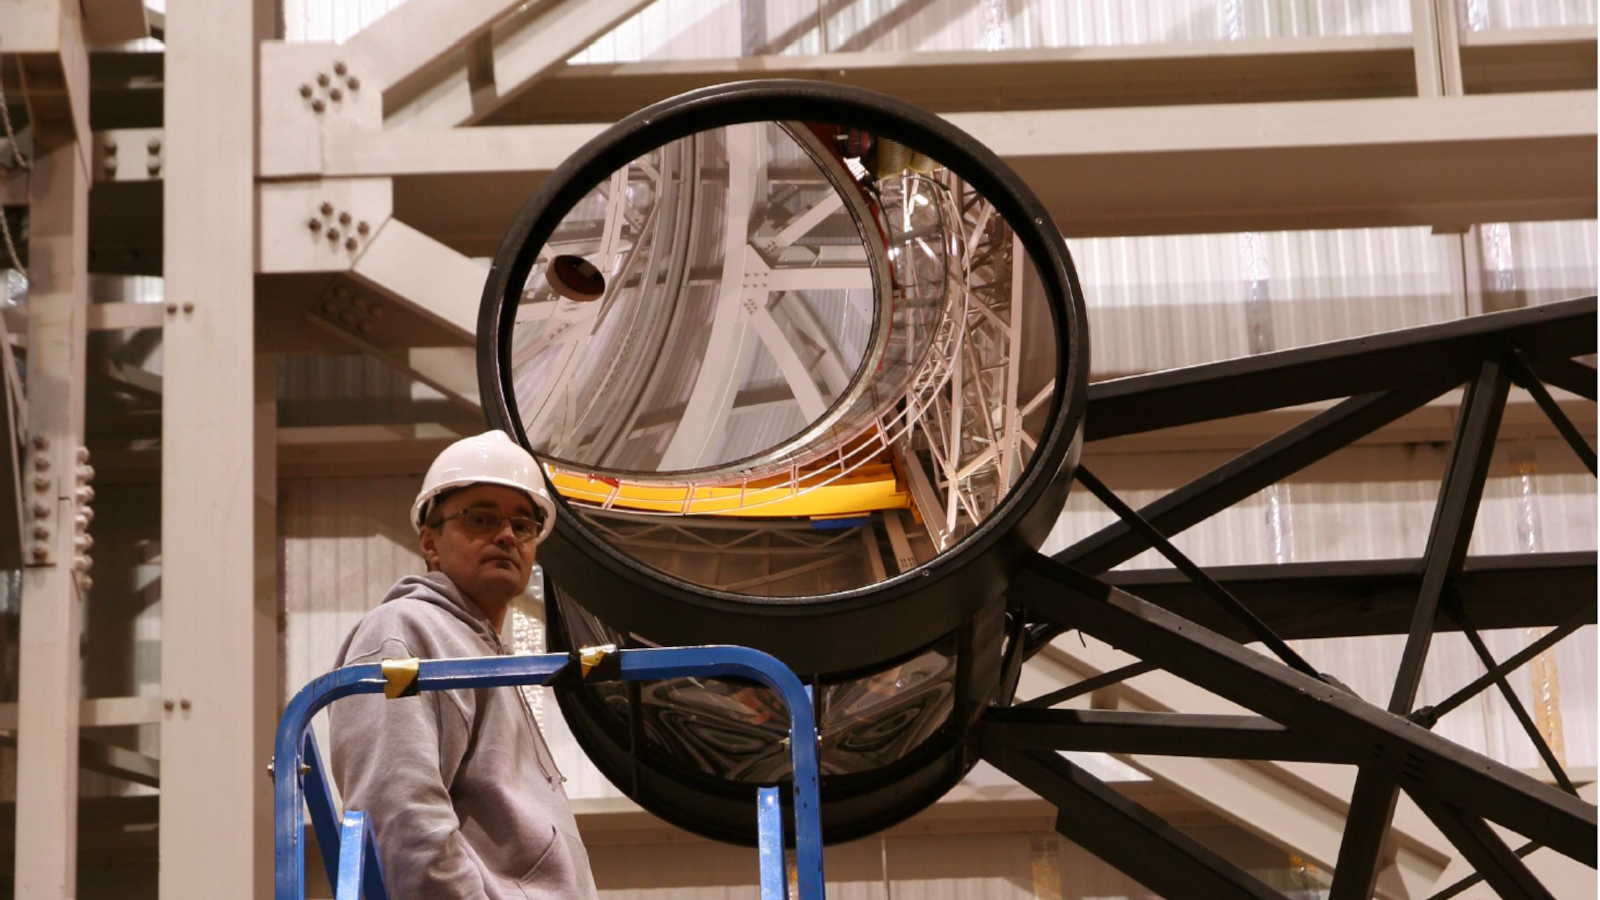 LBT f/15 RSM on the LBT telescope during commissioning in April 2008